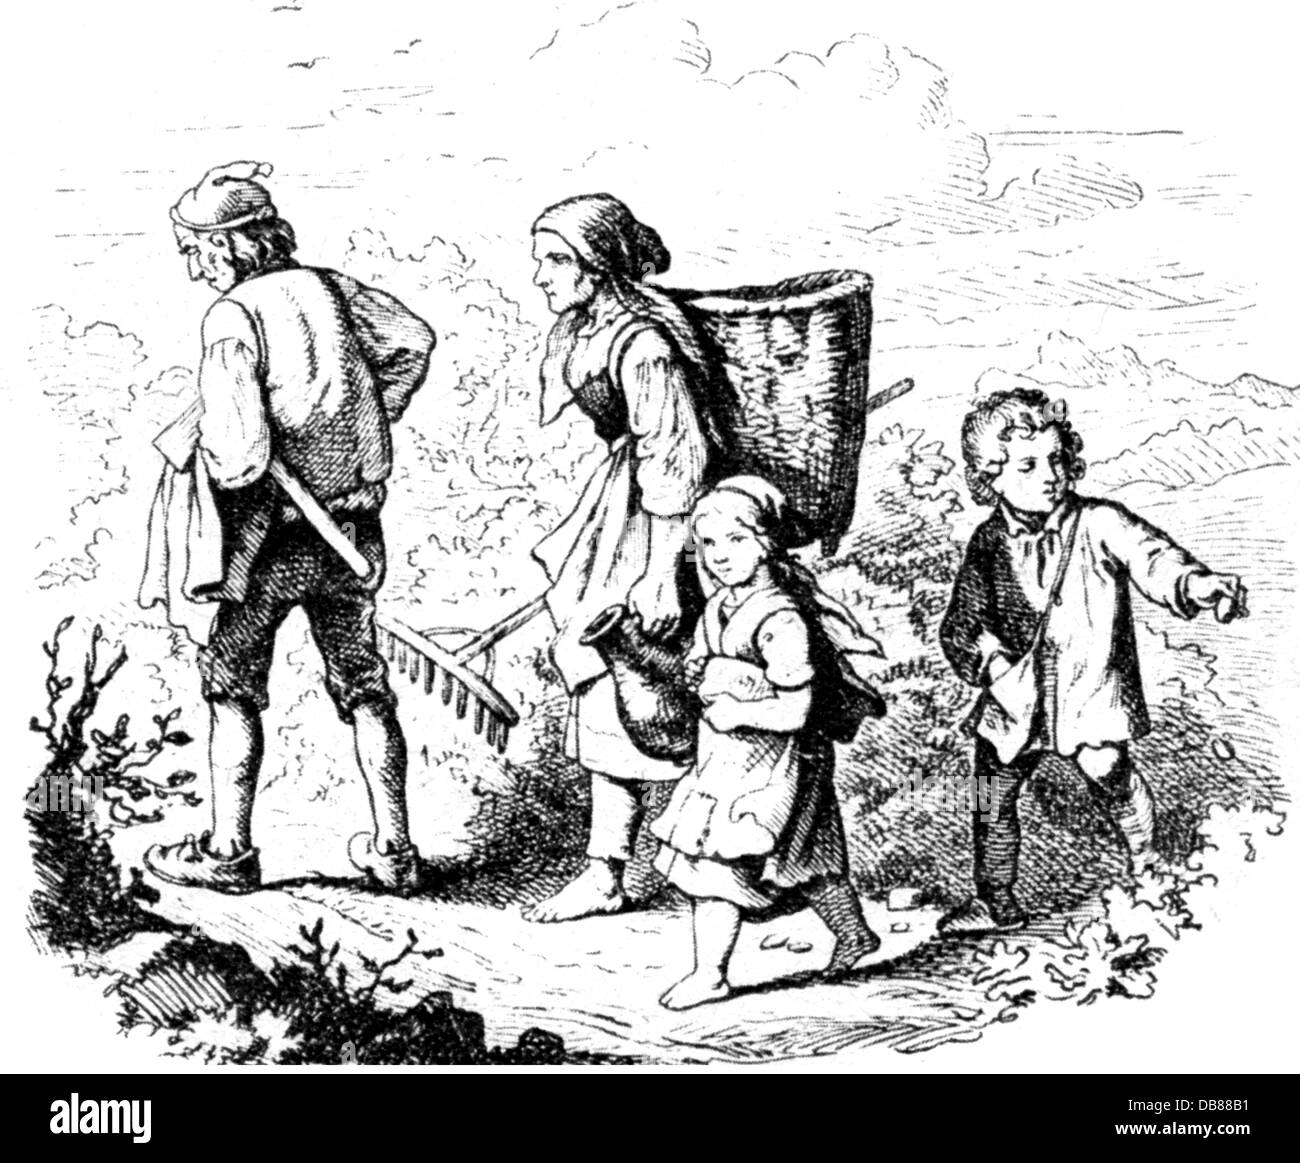 literature,fairytale,brothers Grimm,Hansel and Gretel,the children with their parents,drawing by Ludwig Richter(1804 - 1884),19th century,19th century,graphic,graphics,fairy tales for children,household tale,household tales,fairytale,fairy-tale,fairy story,fairytales,fairy-tales,fairy stories,half length,standing,sibling,siblings,brother,brothers,sister,sisters,parents,parent,going,go,walking,walk,pebble,pebble stone,gravelstone,pebbles,pebble stones,stones,trace,mark,marking,path,paths,historic,historical,female,,Additional-Rights-Clearences-Not Available Stock Photo